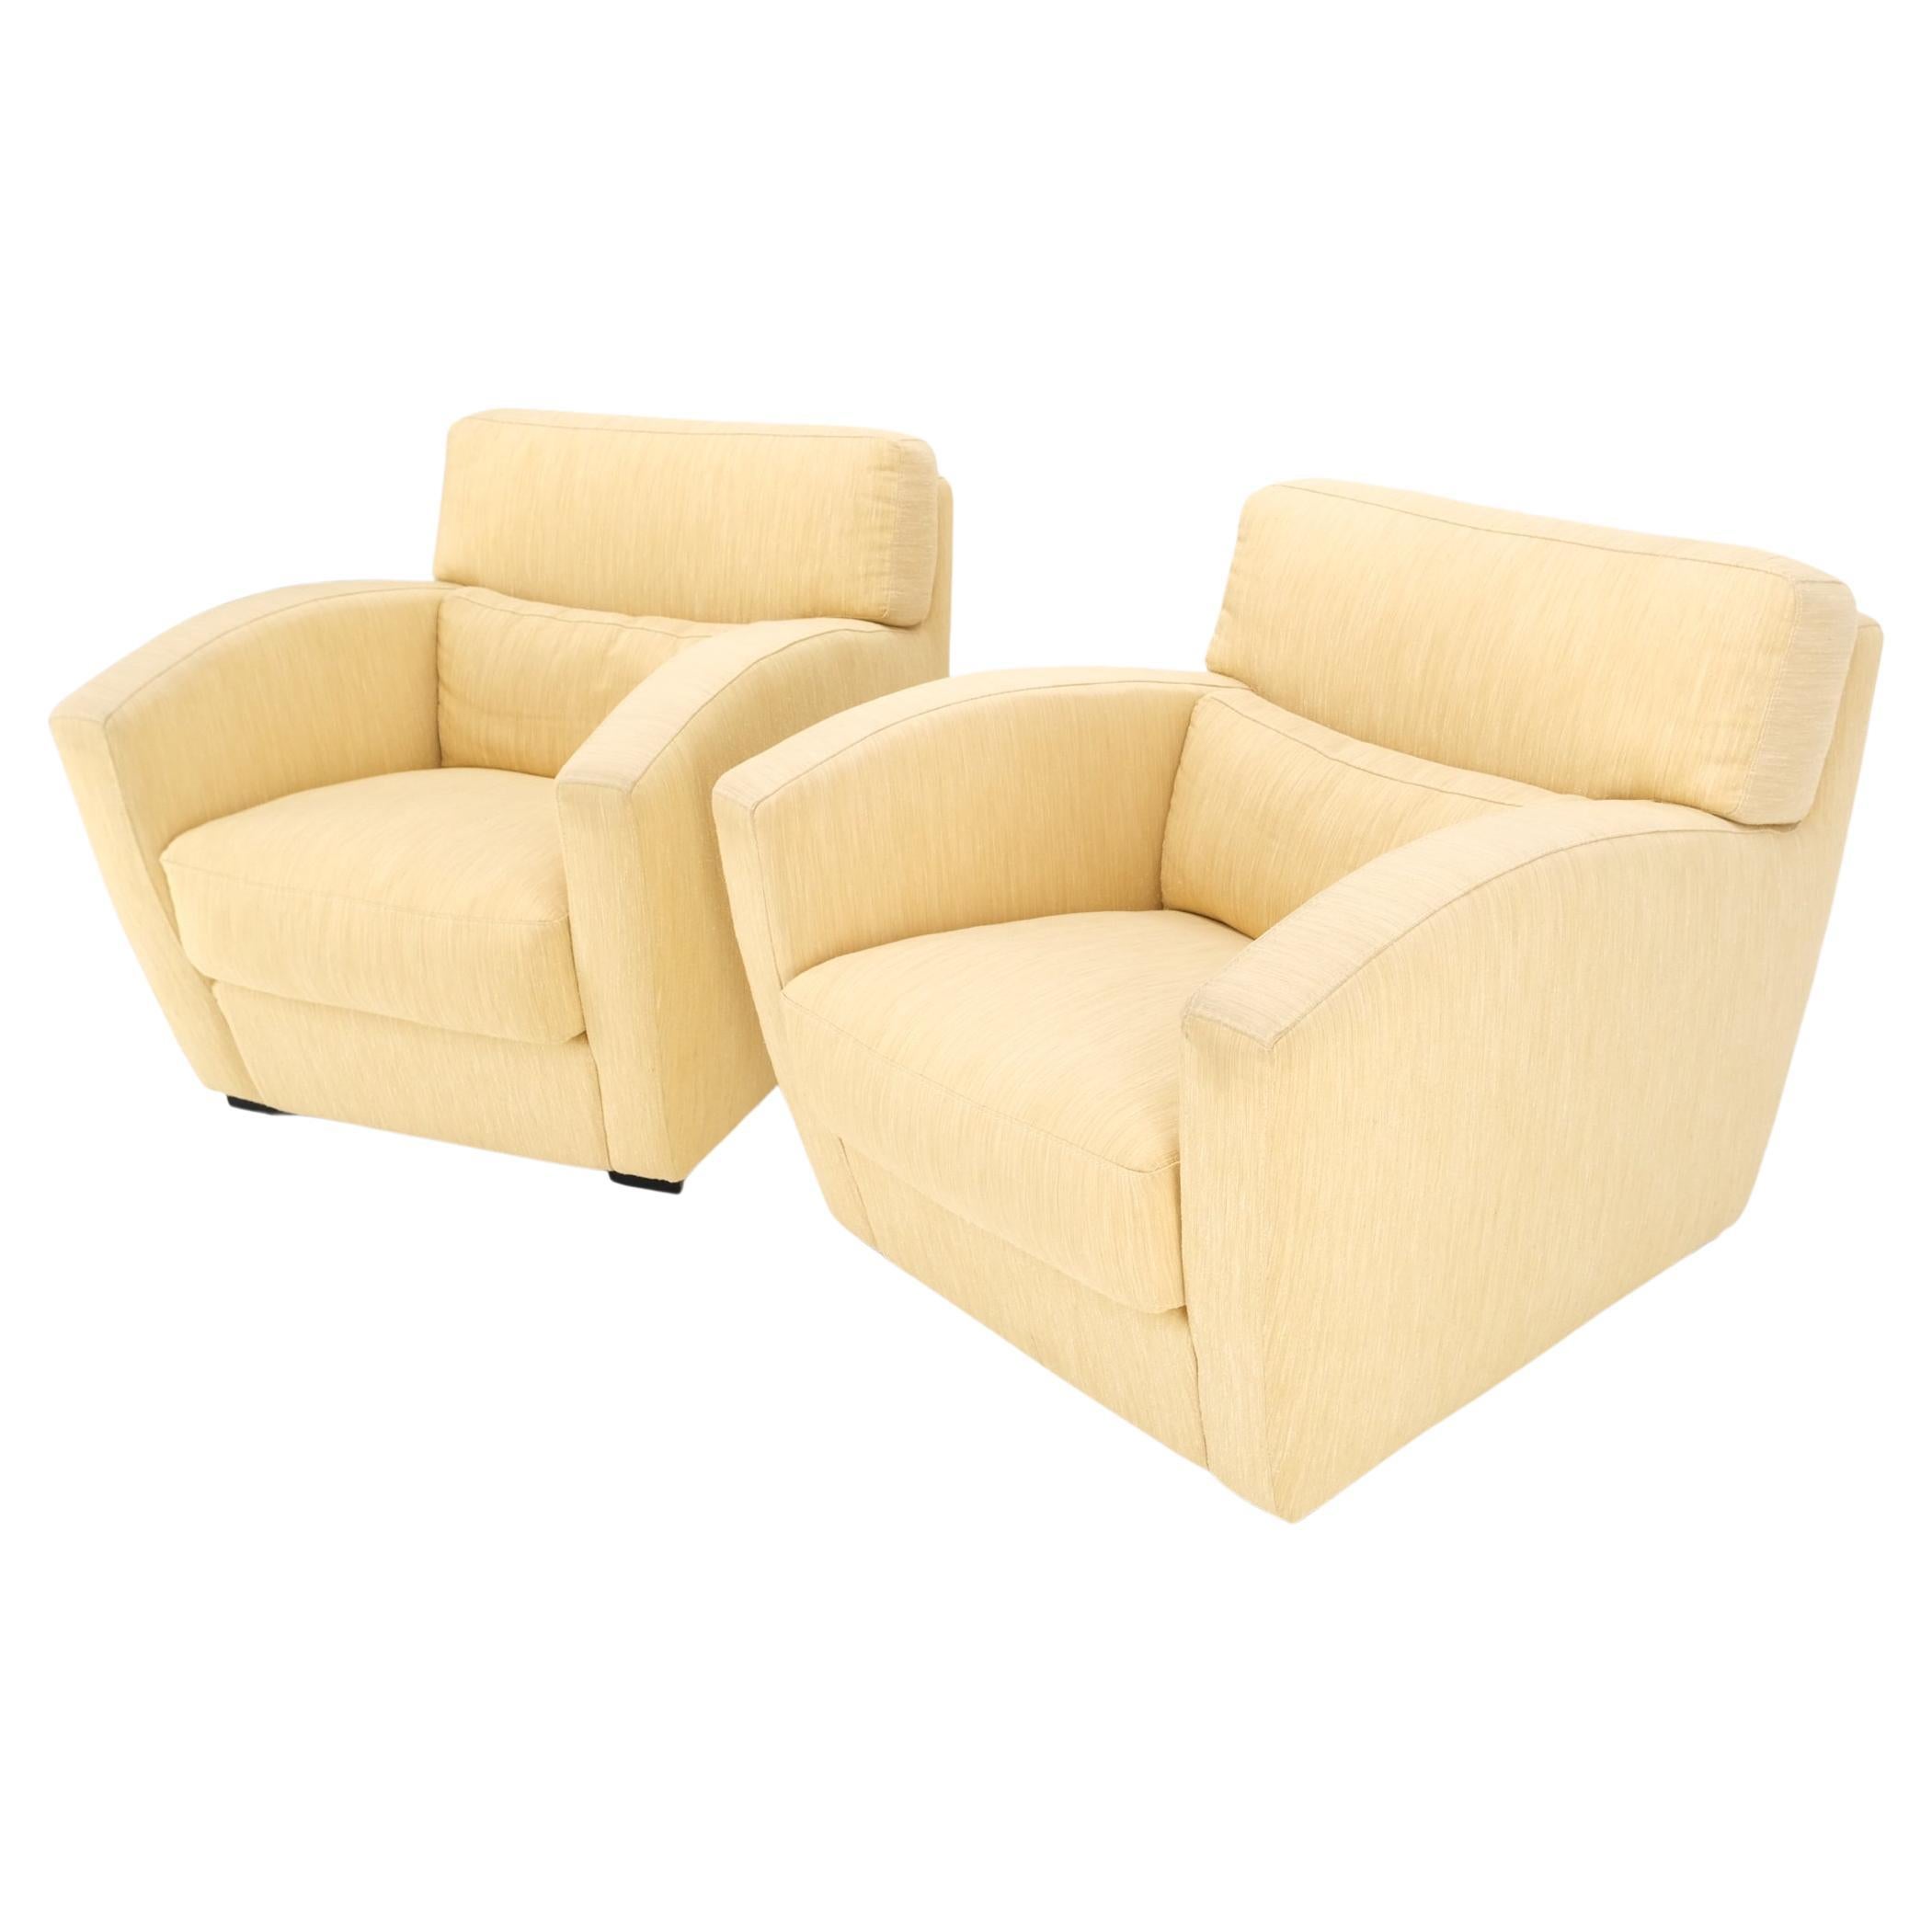 Pair of Vintage Roche Bobois Club Lounge Arm Chairs Mid Century Modern MINT! For Sale